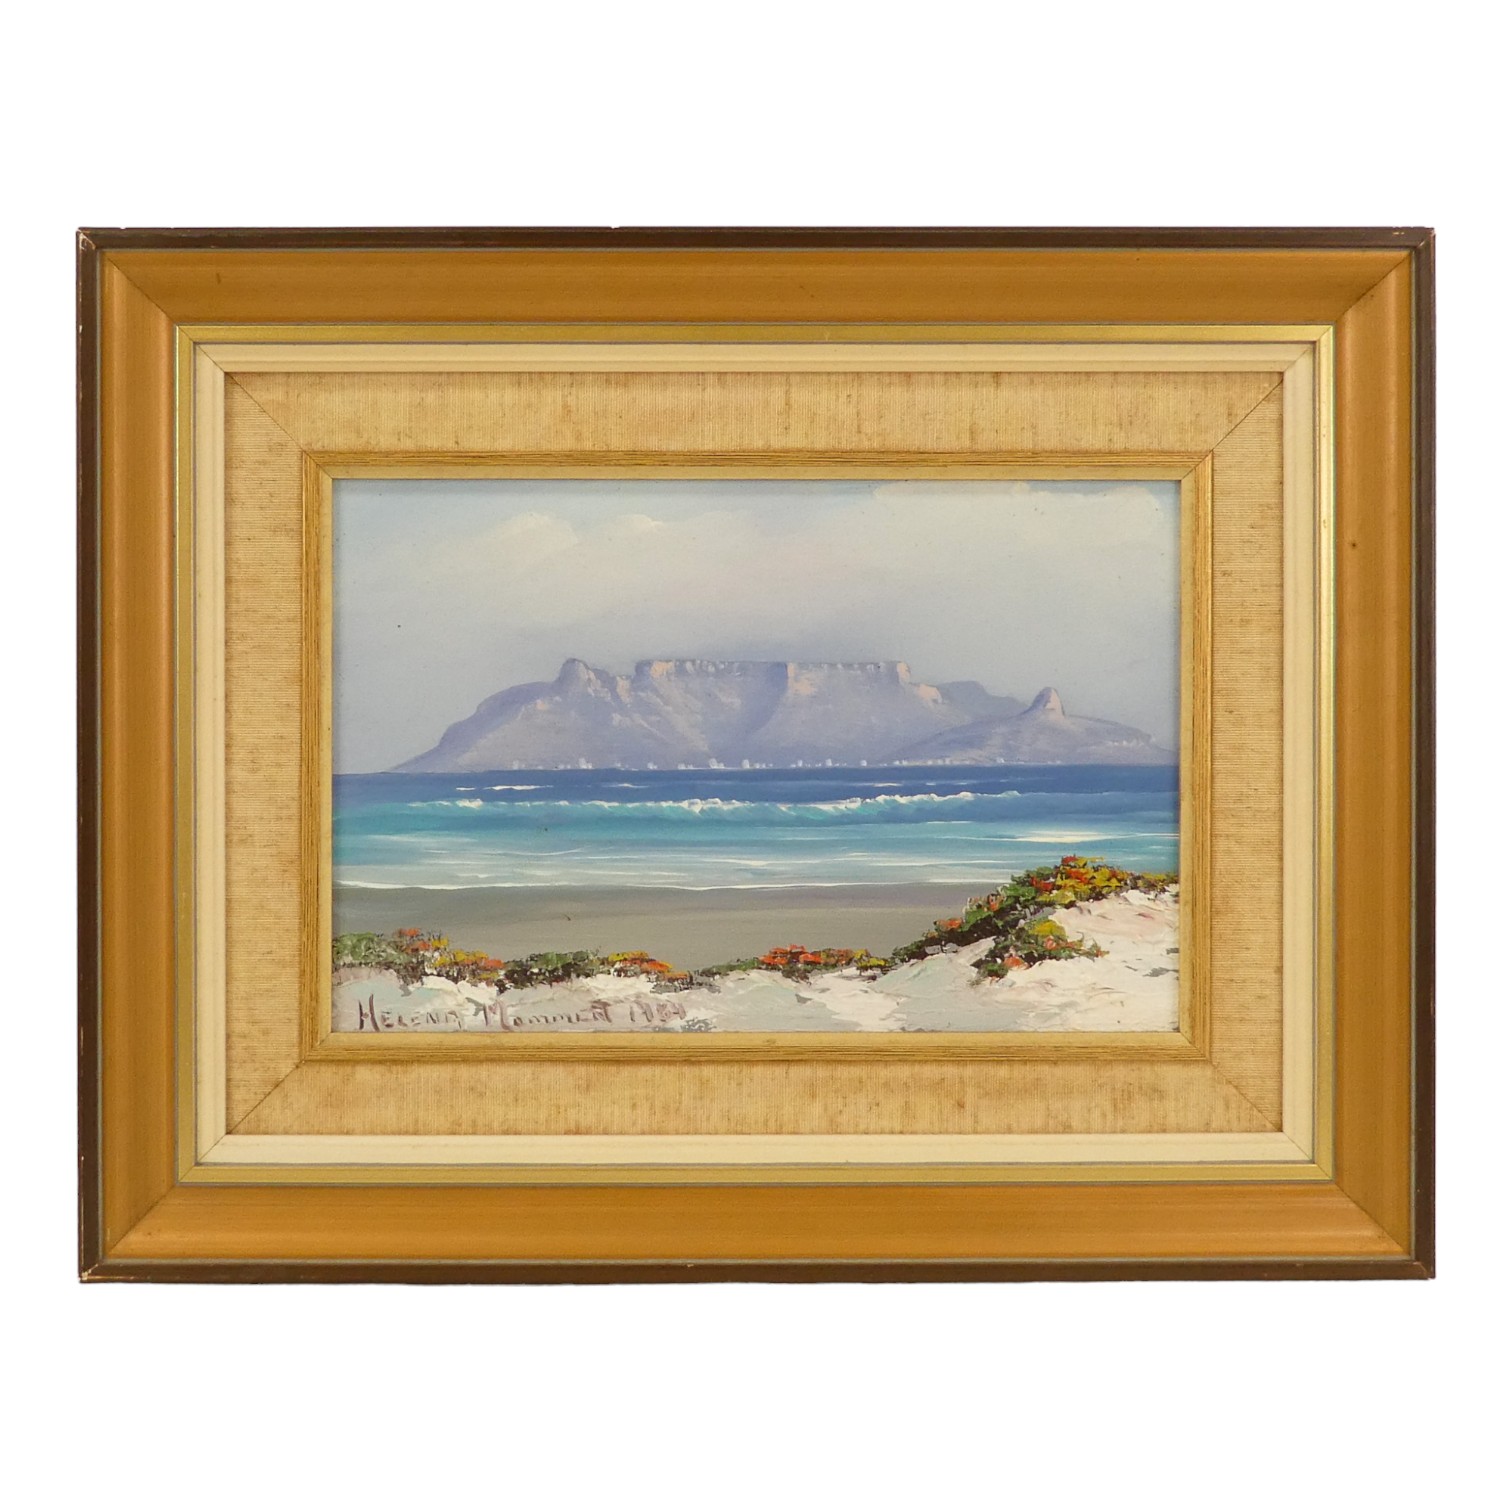 # Helena MOMMENT Table Mountain, South Africa Acrylic on board Signed and dated 1989 Framed - Image 7 of 9